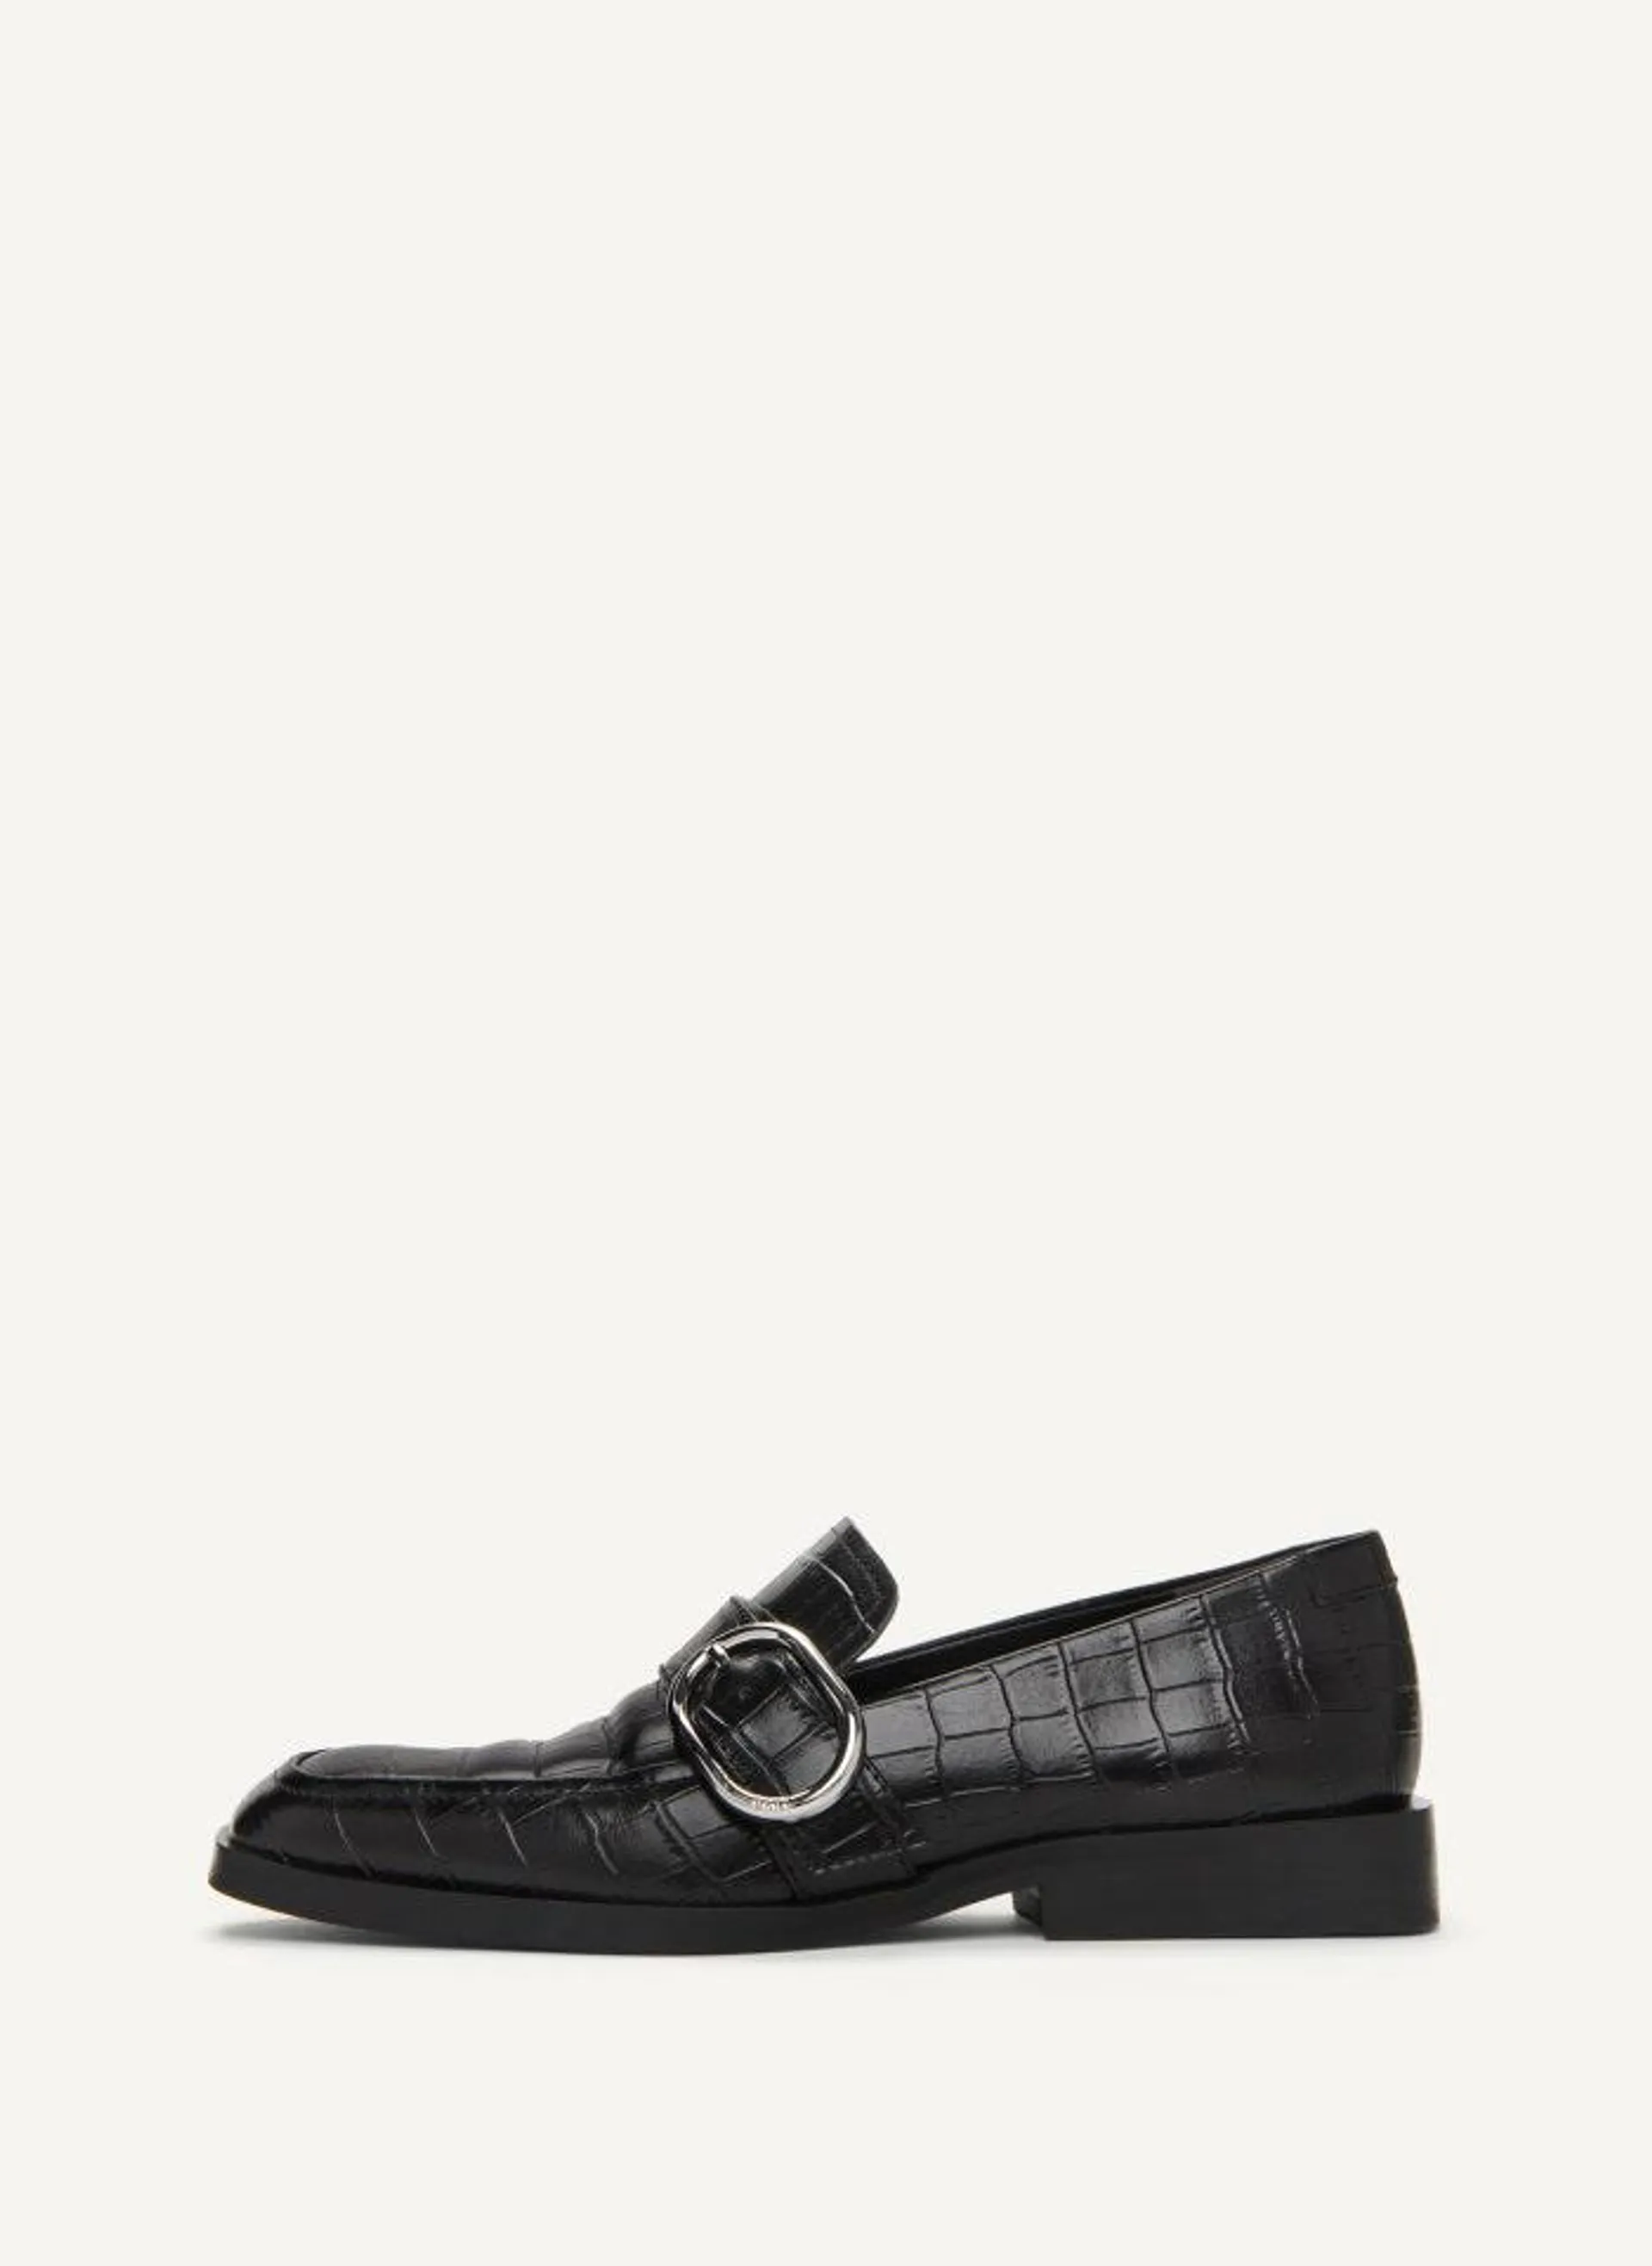 Croco Buckle Loafer